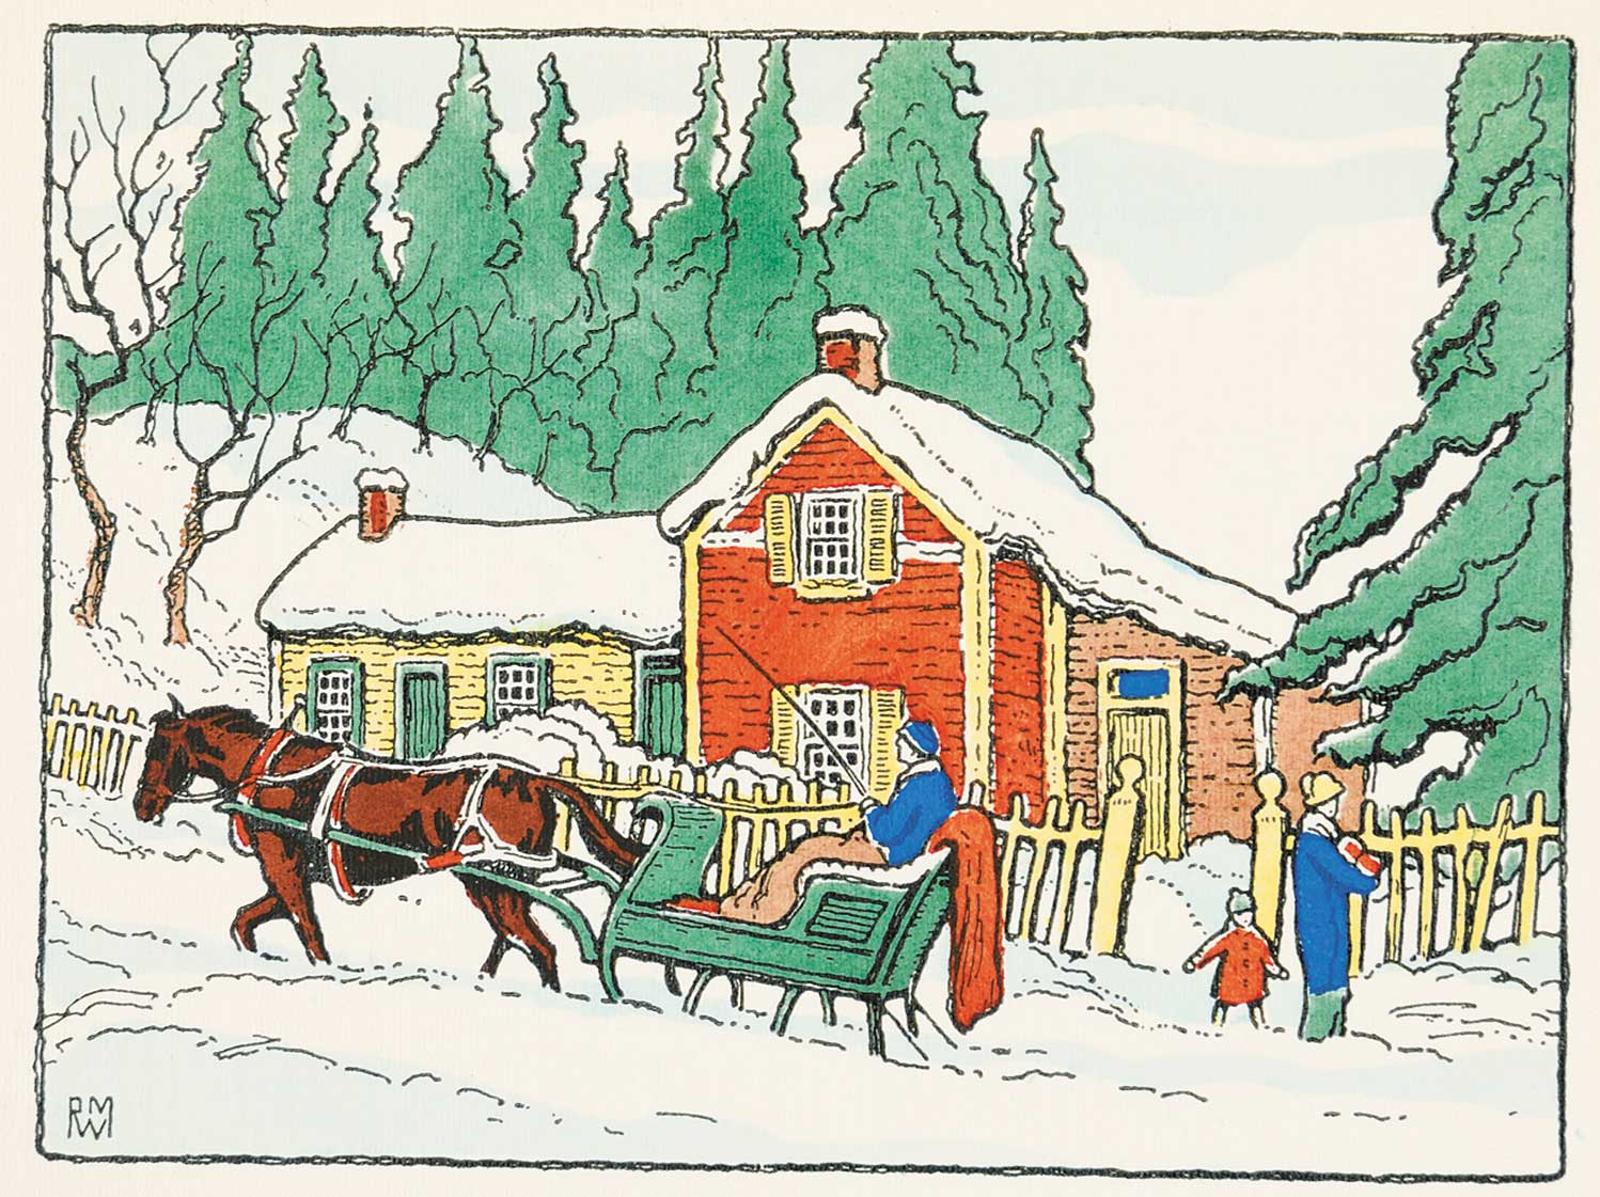 Rowley Walter Murphy (1891-1975) - Untitled - Sleigh Ride at Christmas